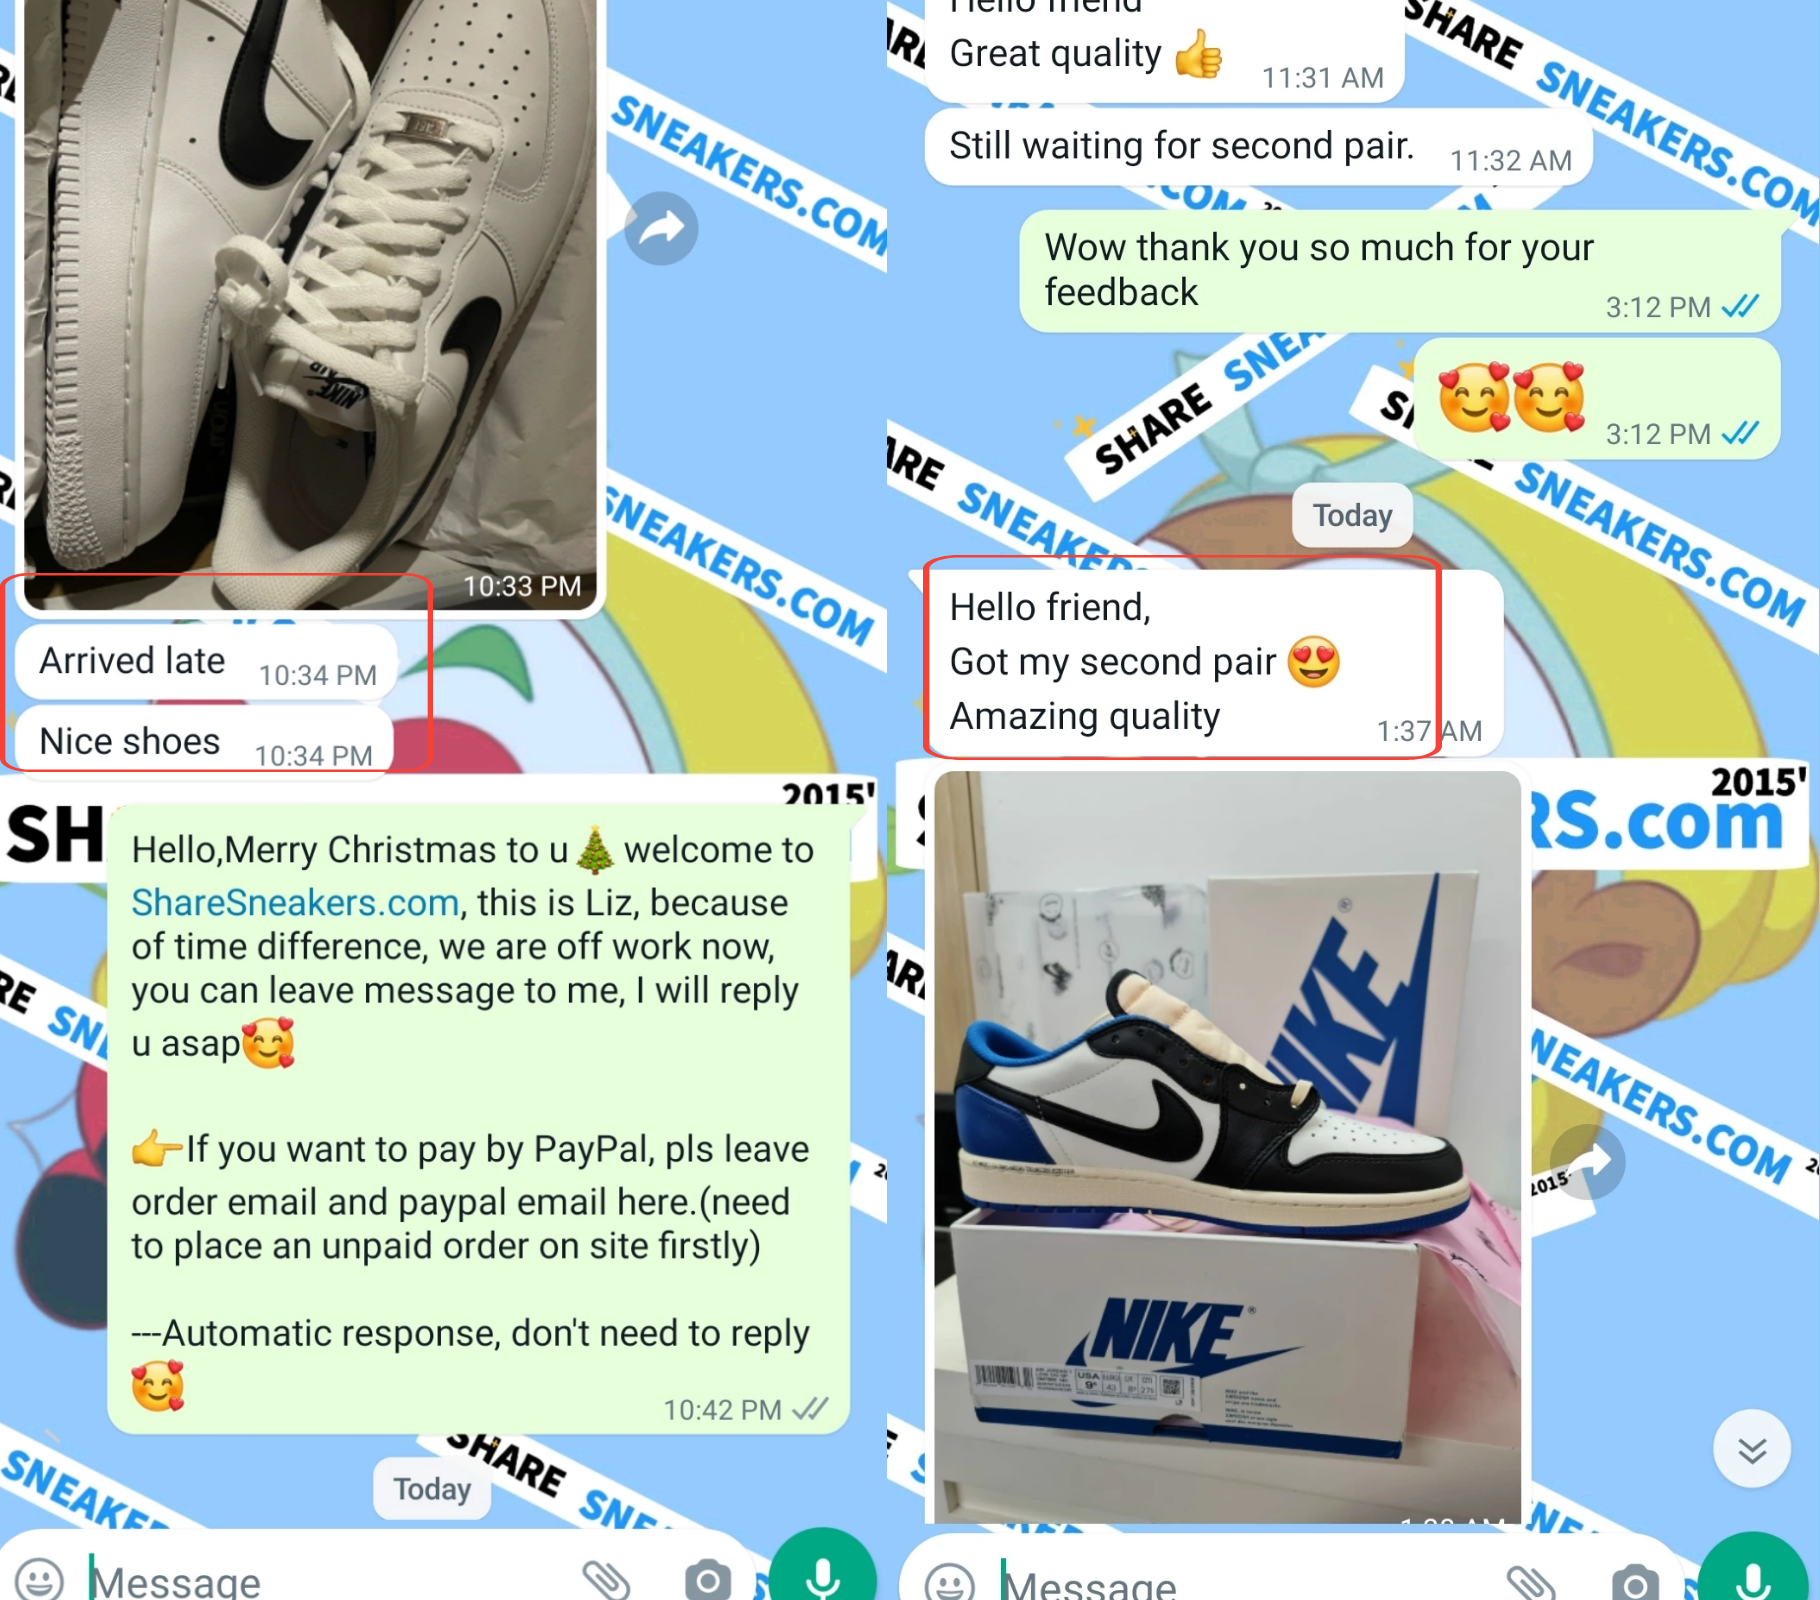 Customer Review for Sharesneakers